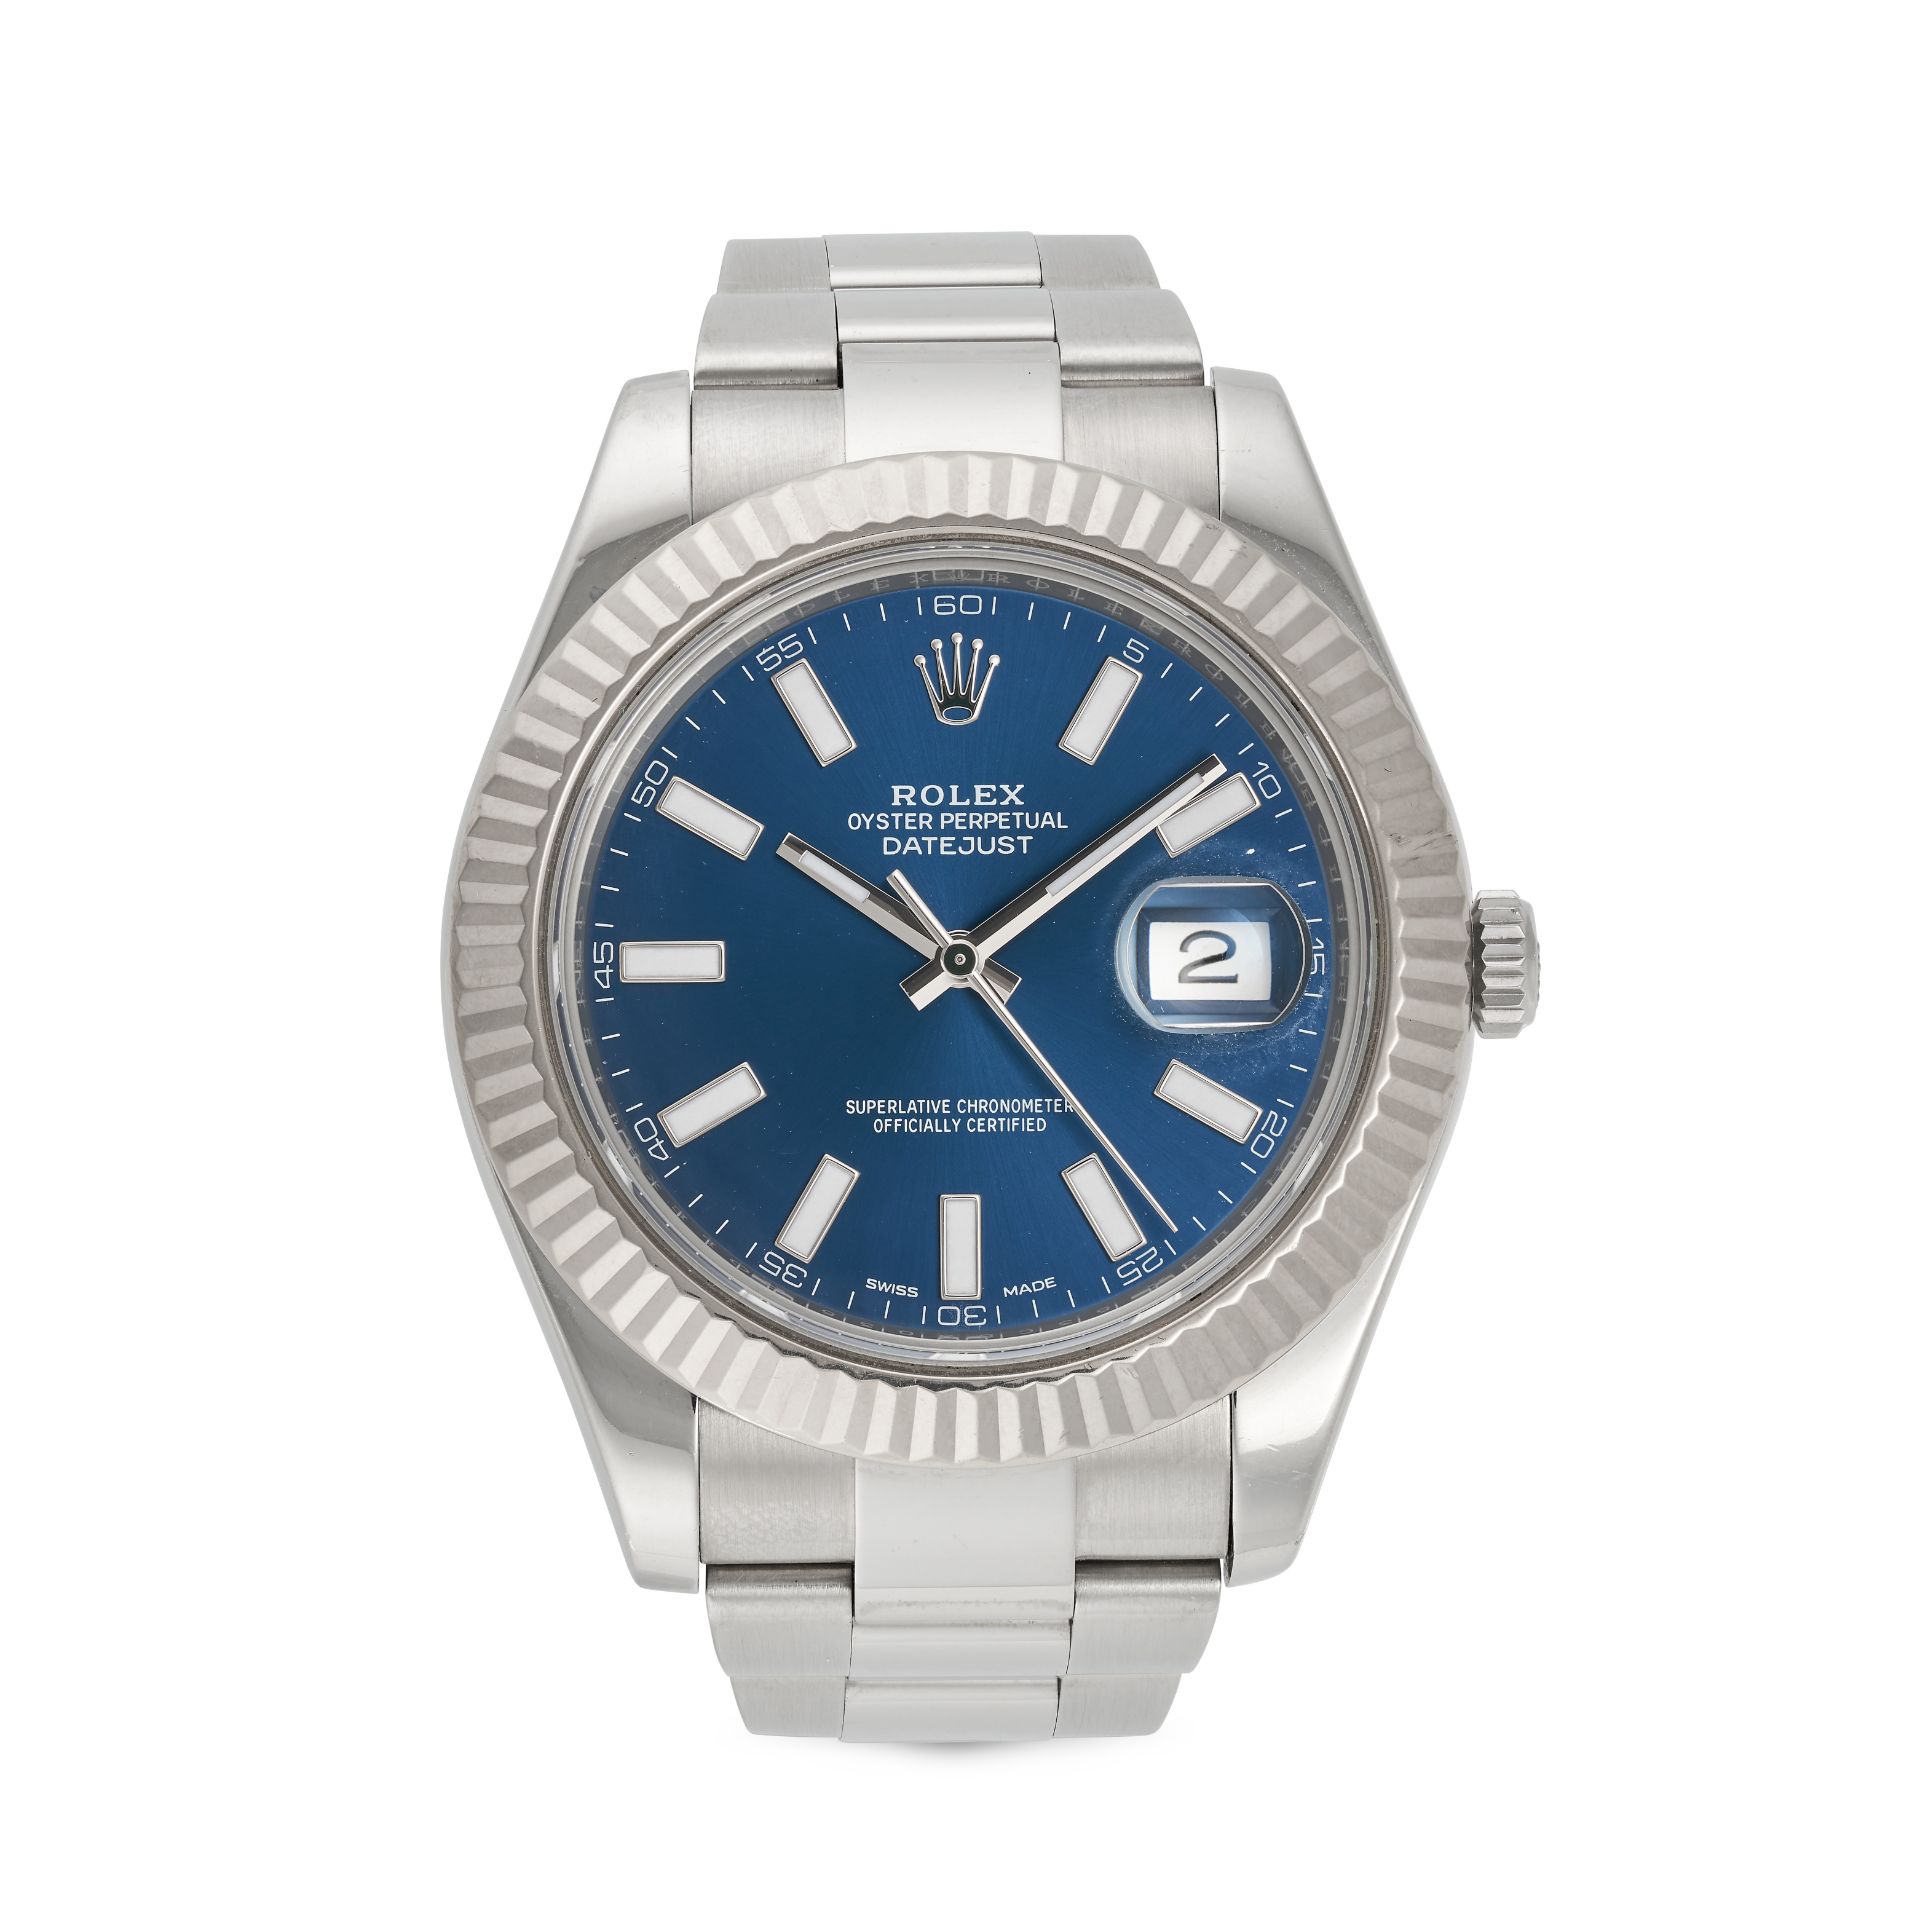 ROLEX - A ROLEX OYSTER PERPETUAL DATEJUST II WRISTWATCH in stainless steel, 116334, the blue sunb...